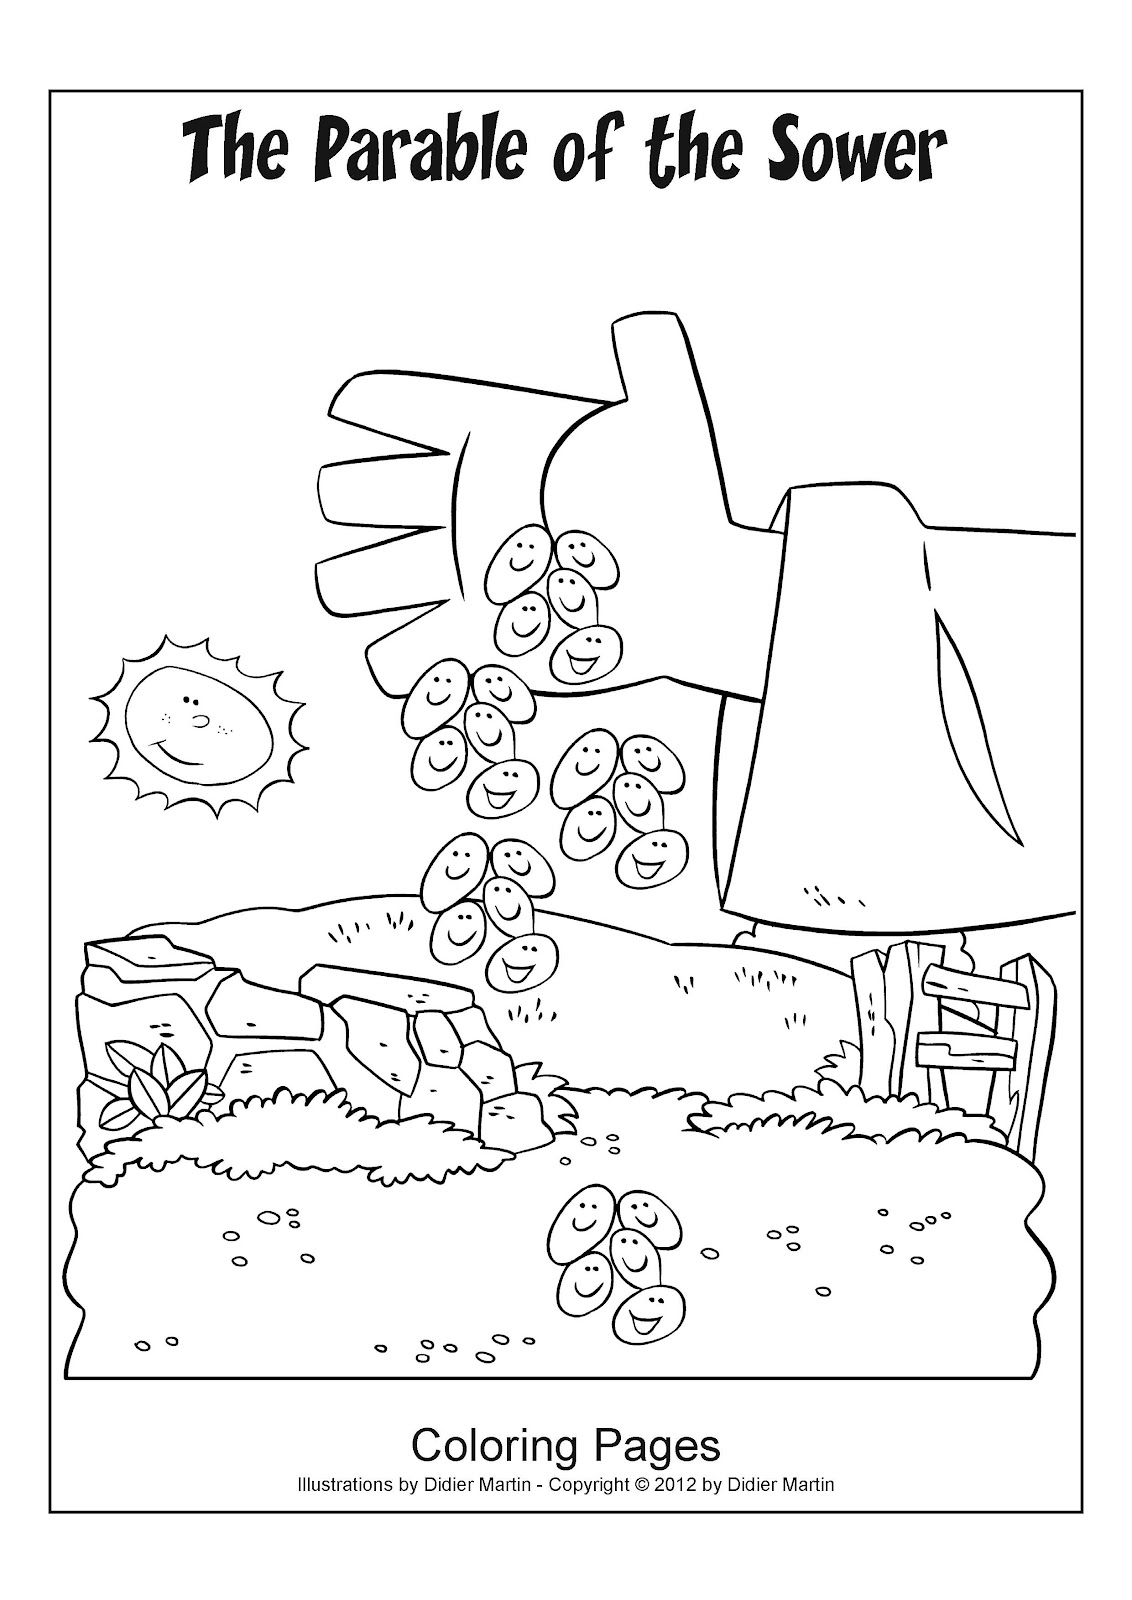 My Little House Bible Activity Pages The Parable of the Sower